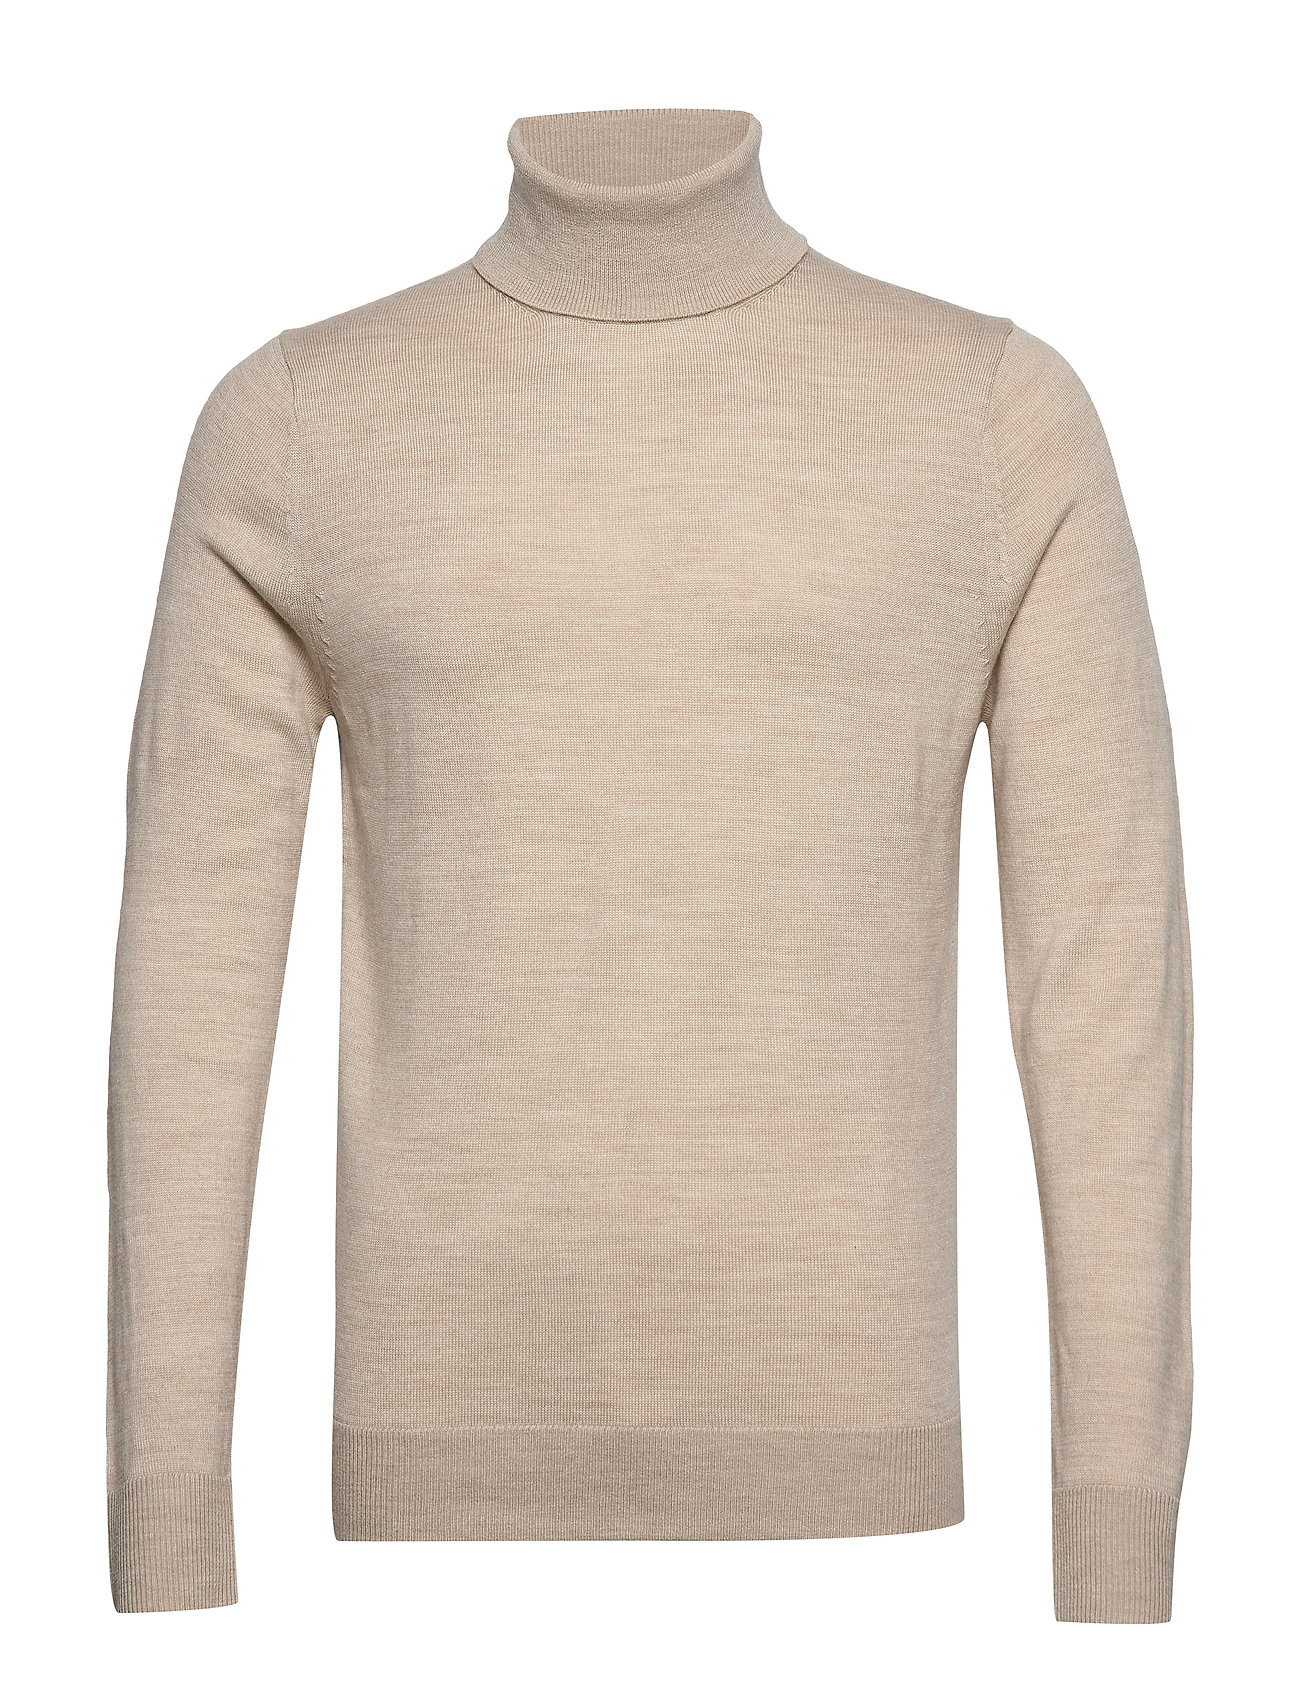 abercrombie and fitch turtleneck